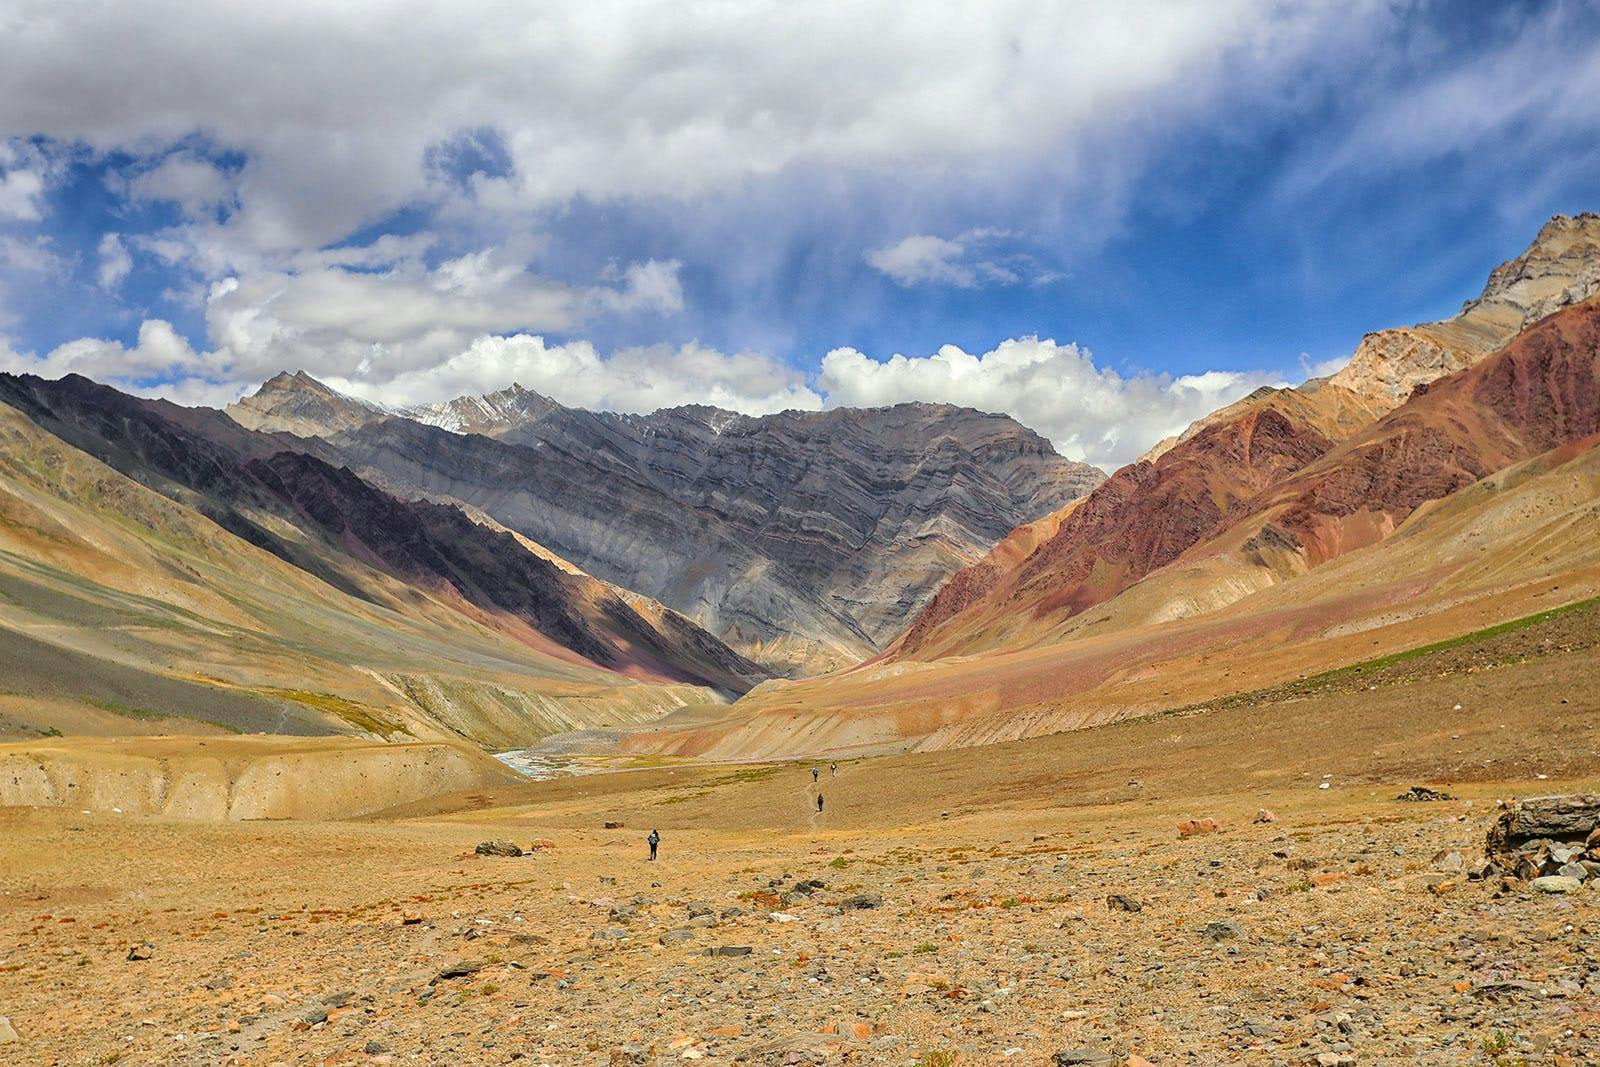 A group of trekkers walking in the dry meadows of Pin Bhaba Pass